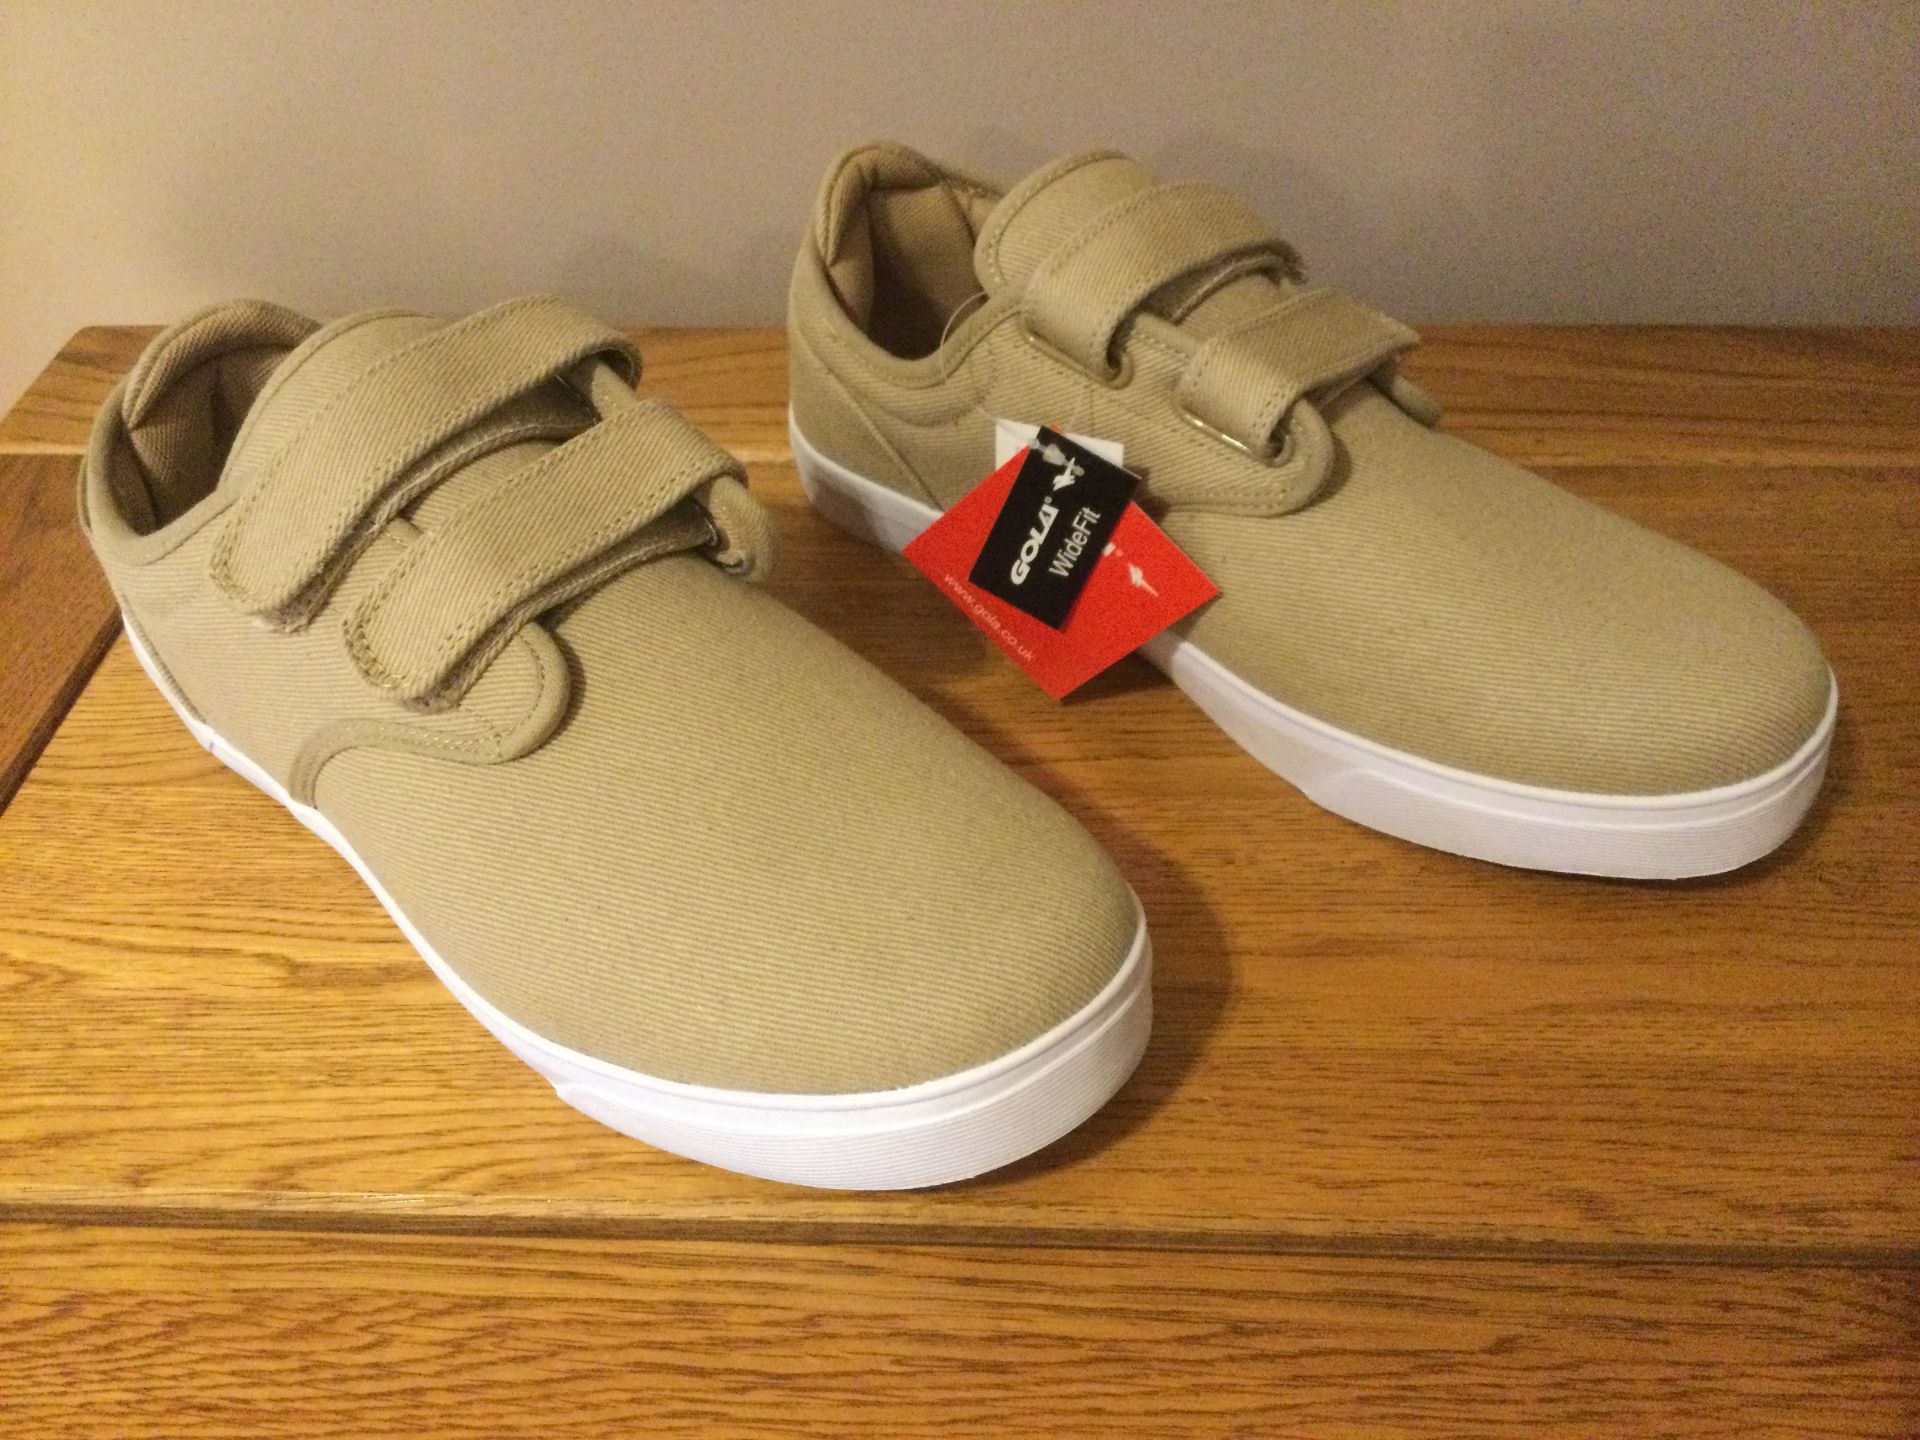 Gola “Panama” QF Men's Wide Fit Trainers, Size 10, Taupe/White - New RRP £36.00 - Bild 3 aus 5